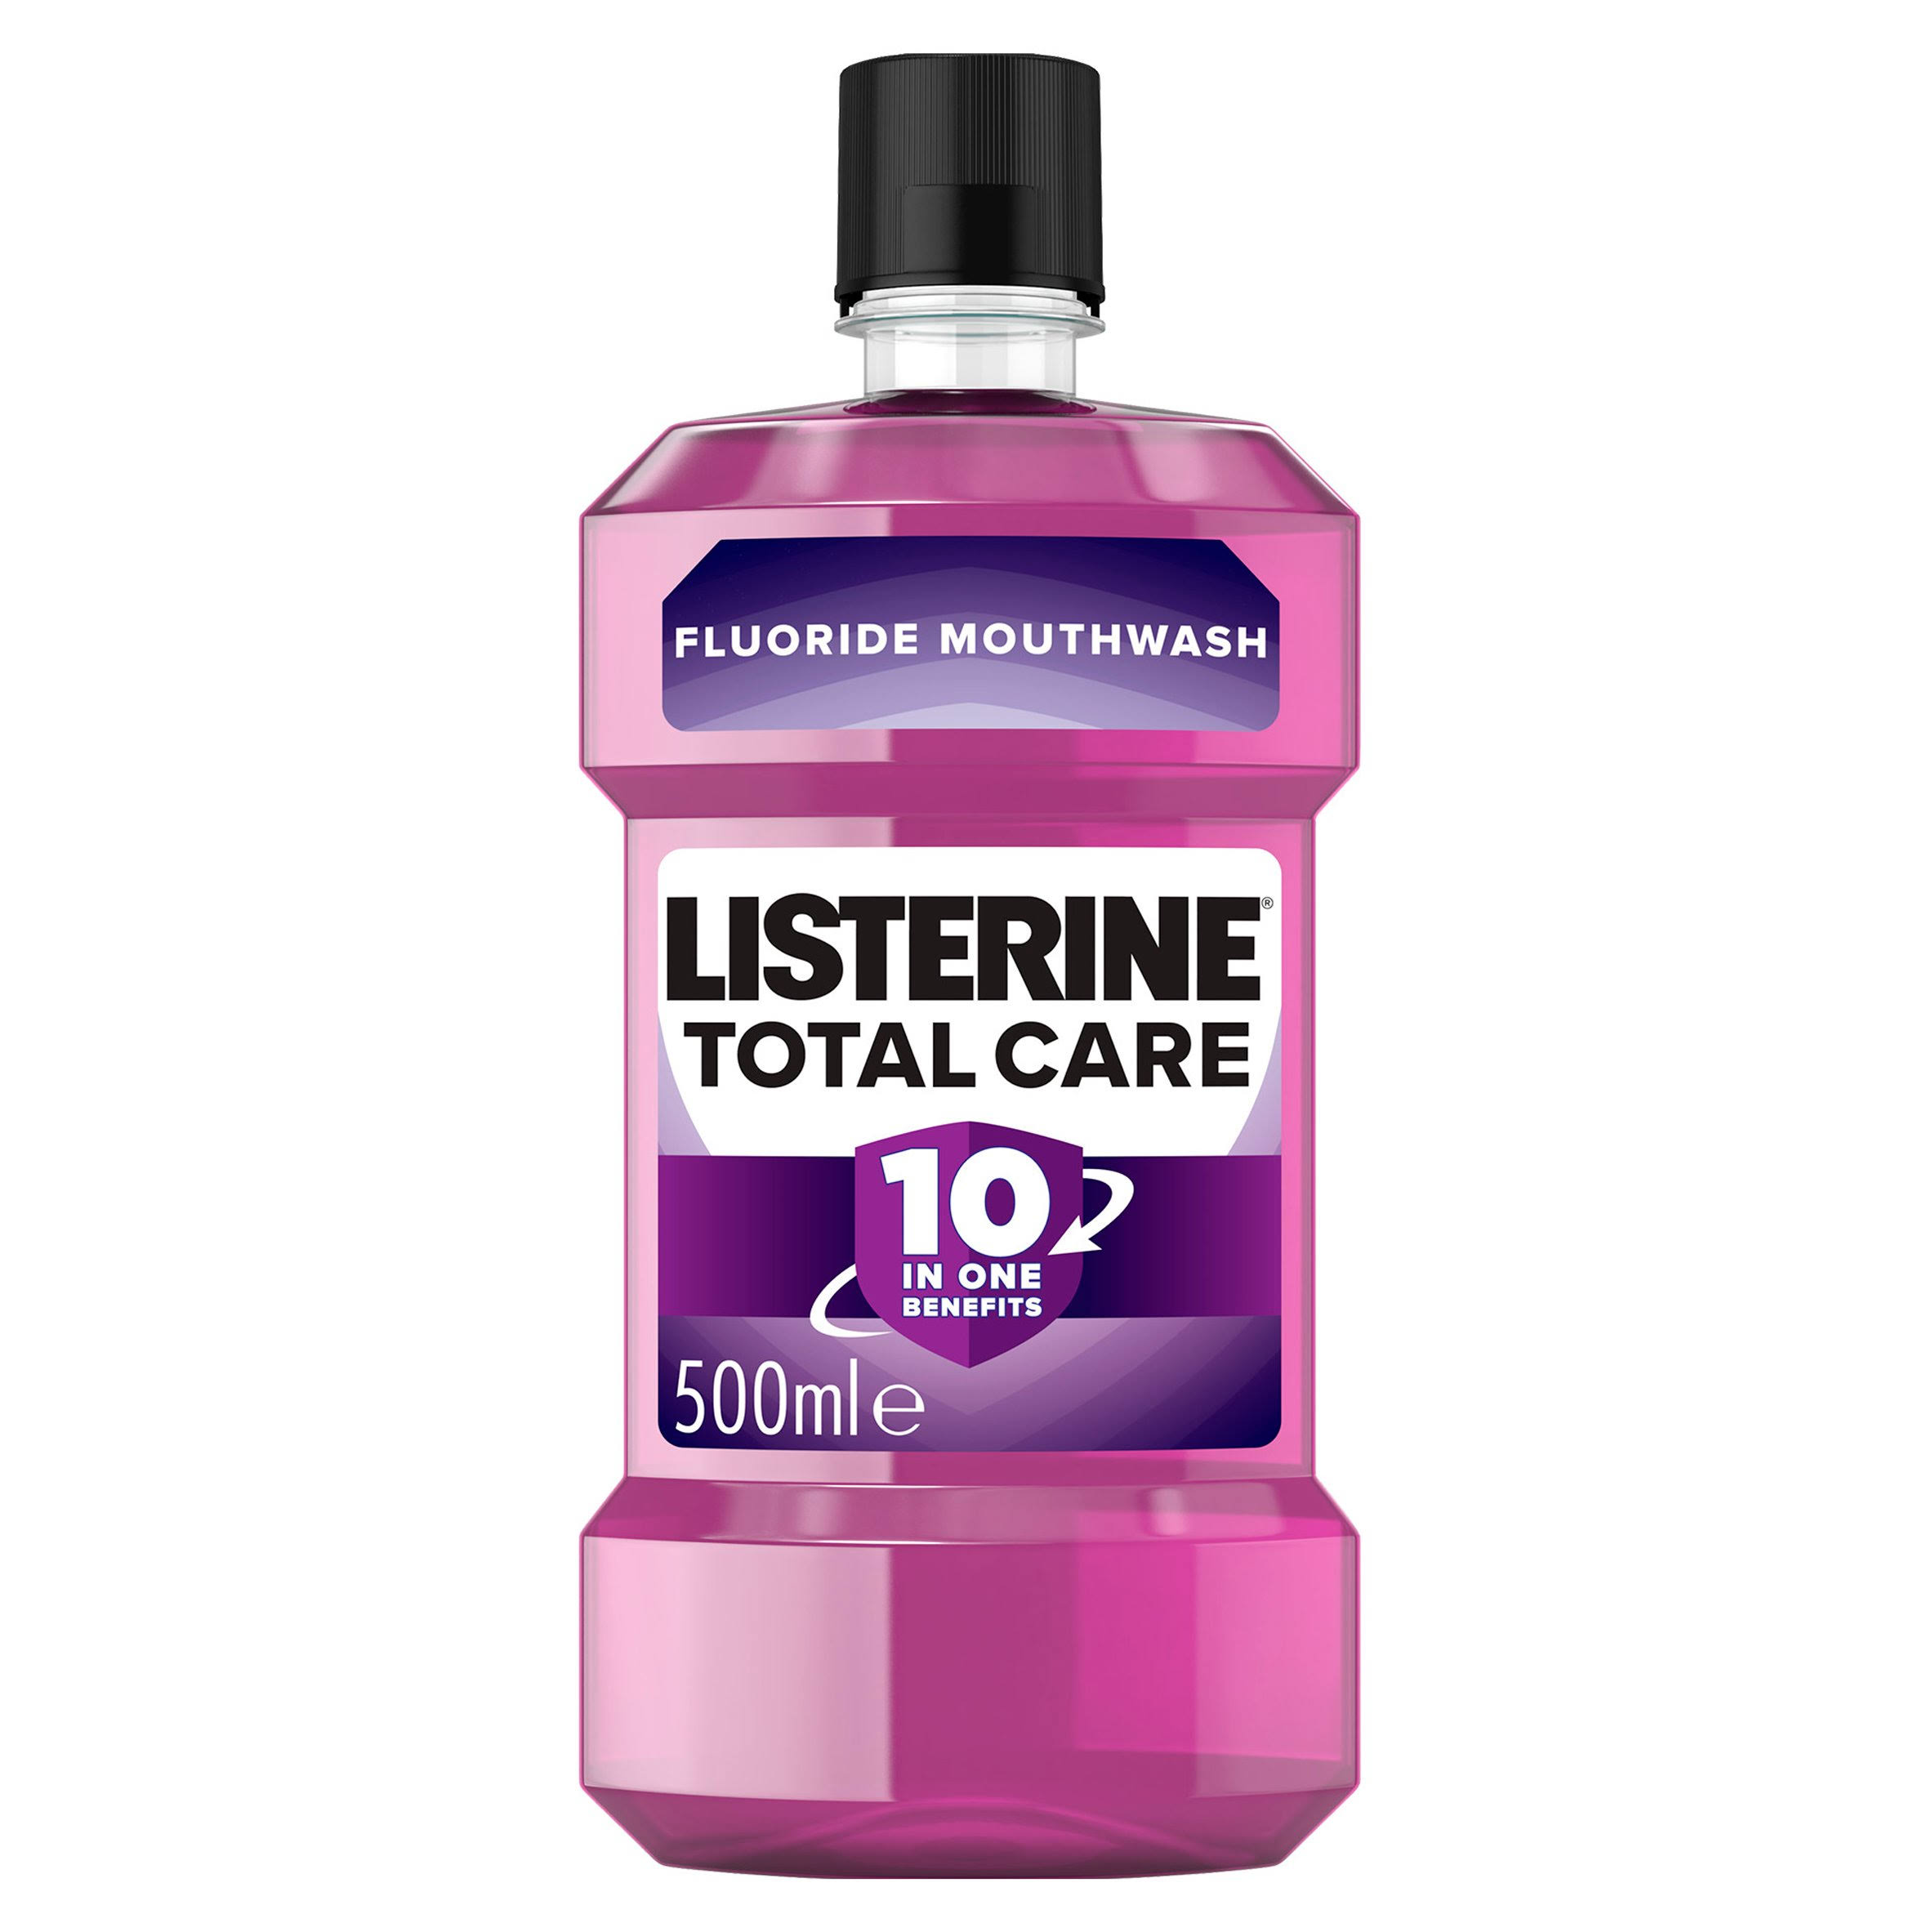 Listerine Total Care Clean Mint Antibacterial Mouthwash - 500ml